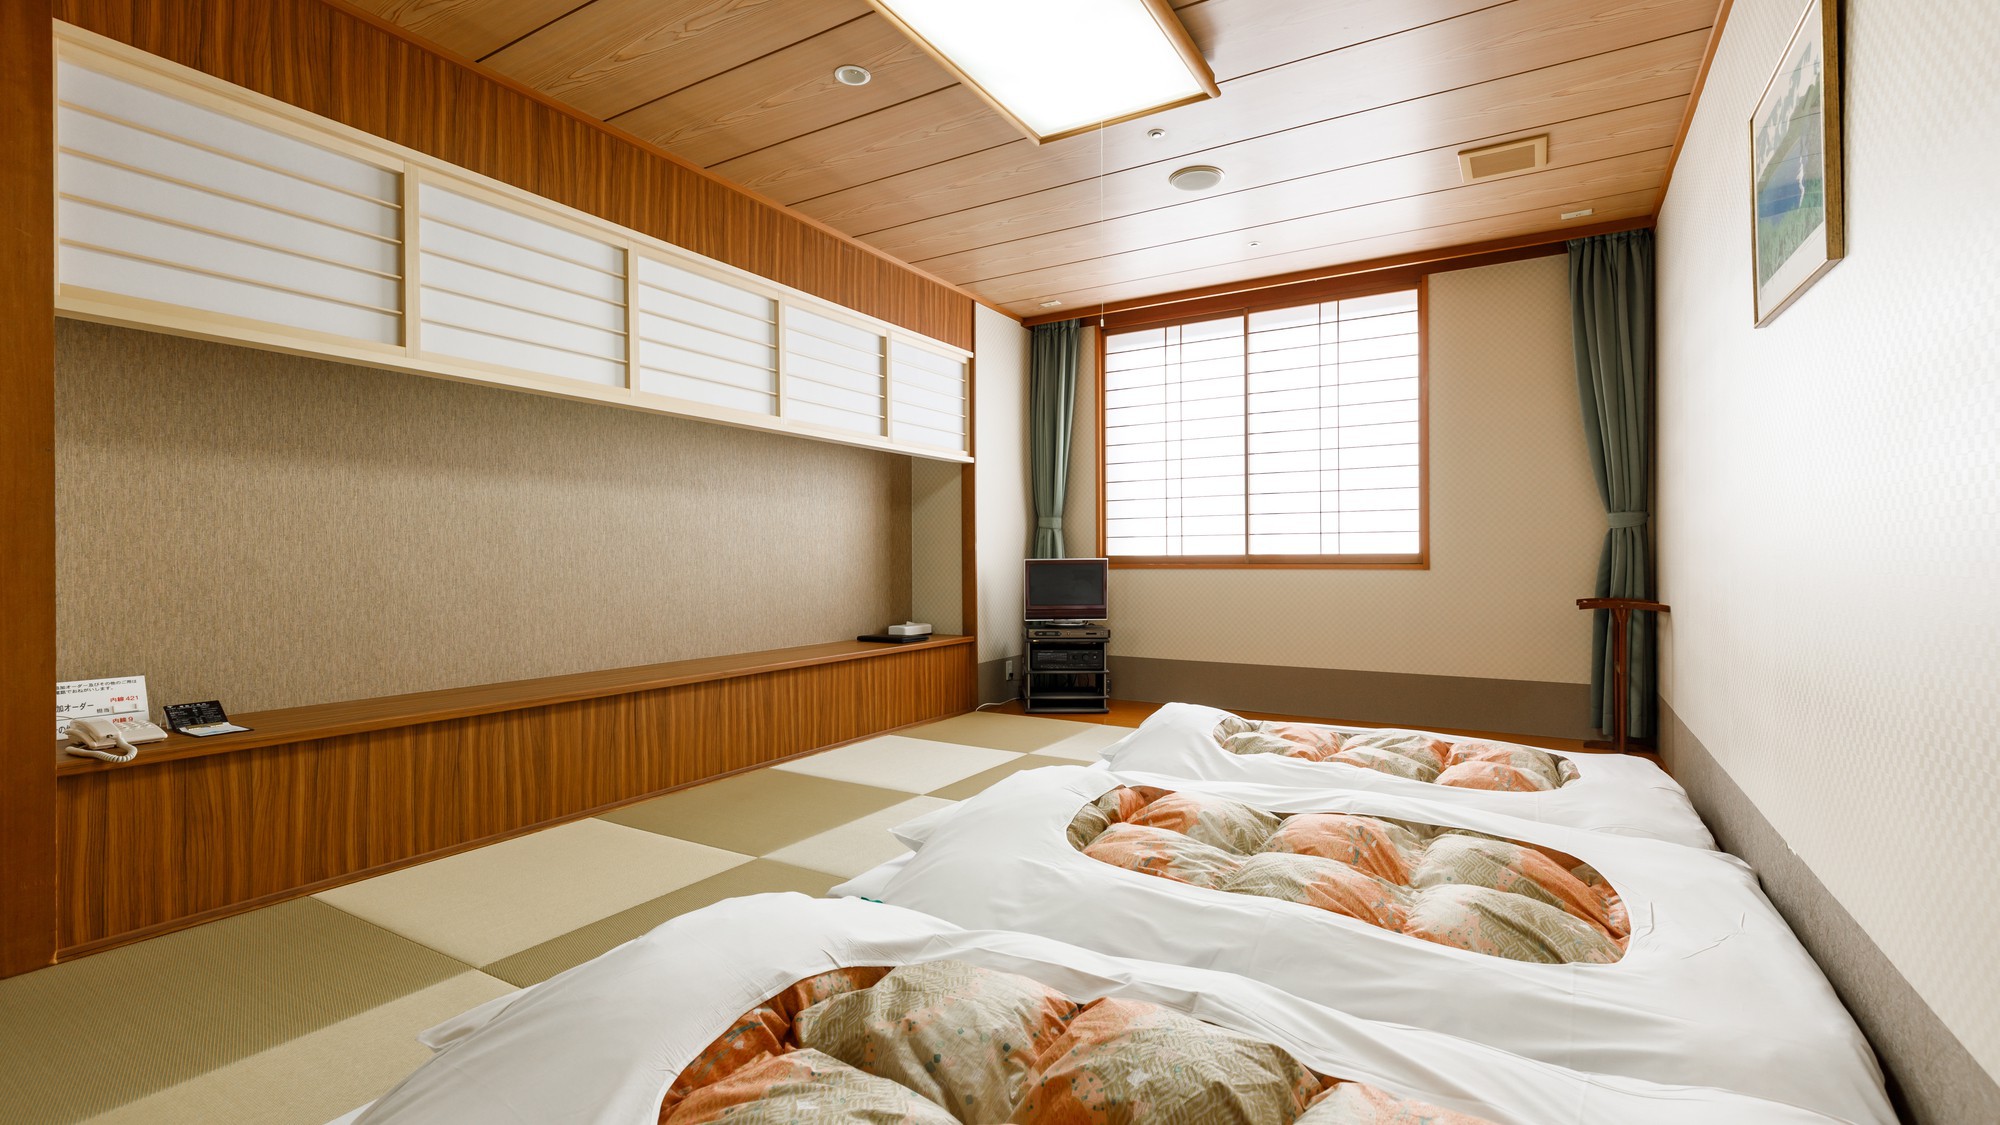 Tennen Onsen Relax Park Terume Kanazawa Tennen Onsen Relax Park Terume Kanazawa is conveniently located in the popular Kanazawa area. Featuring a satisfying list of amenities, guests will find their stay at the property a comfortable one. F